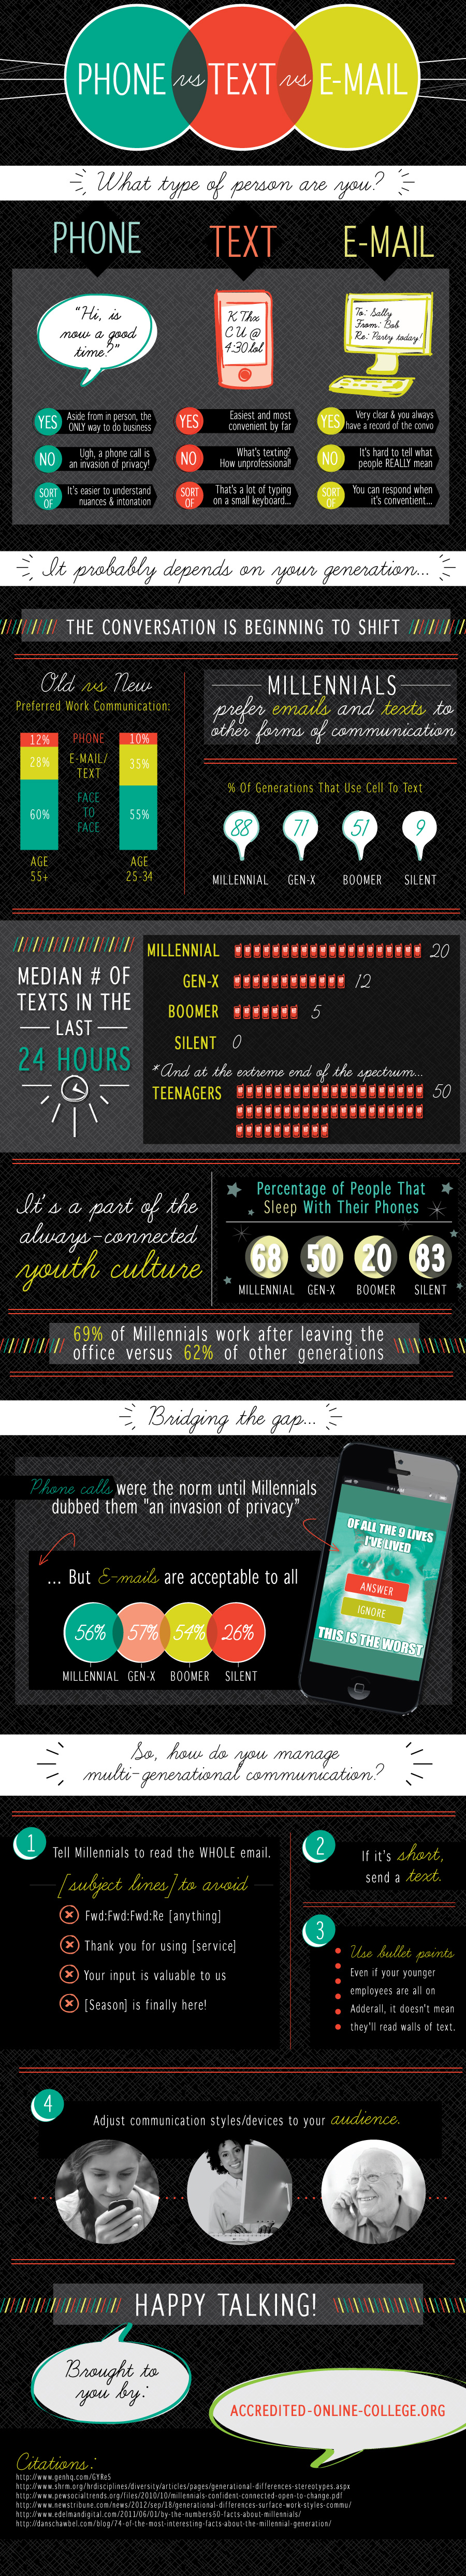 Phone_text_email infographic